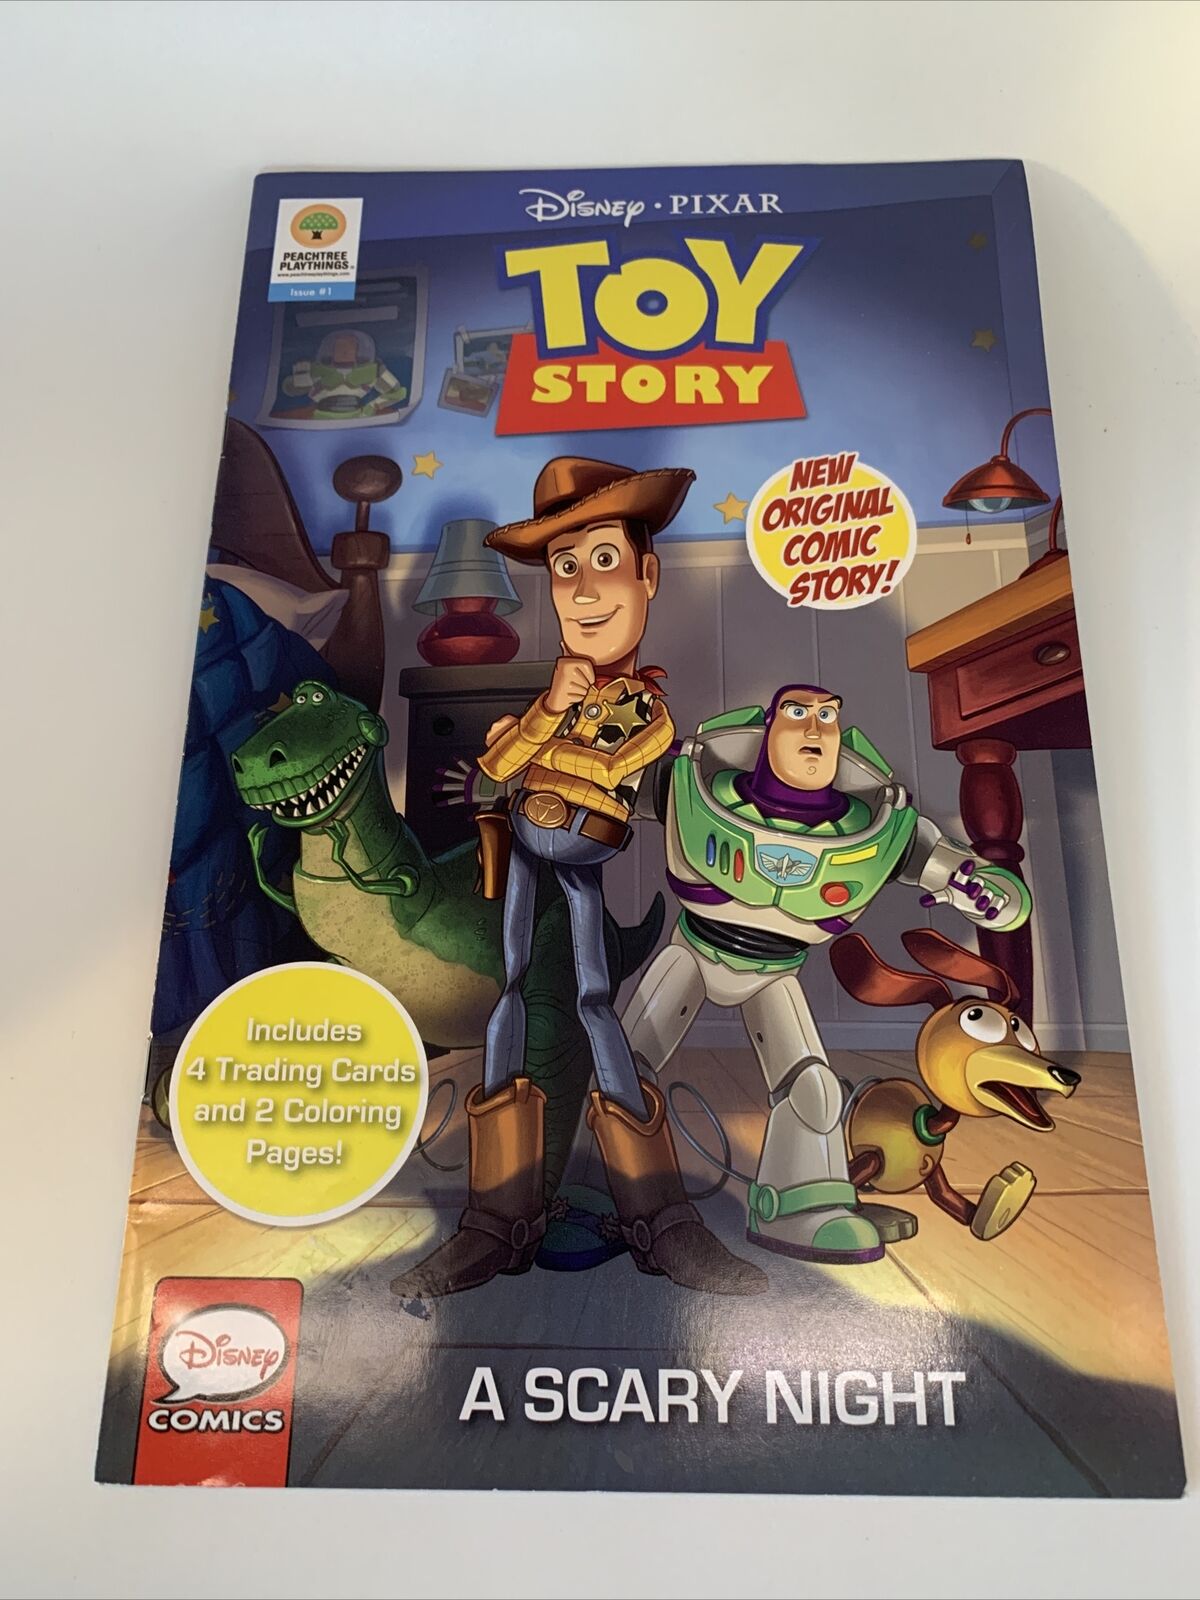 Pixar-DISNEY'S TOY STORY Comic Book A Scary Night, Unused Cards Or Coloring Page